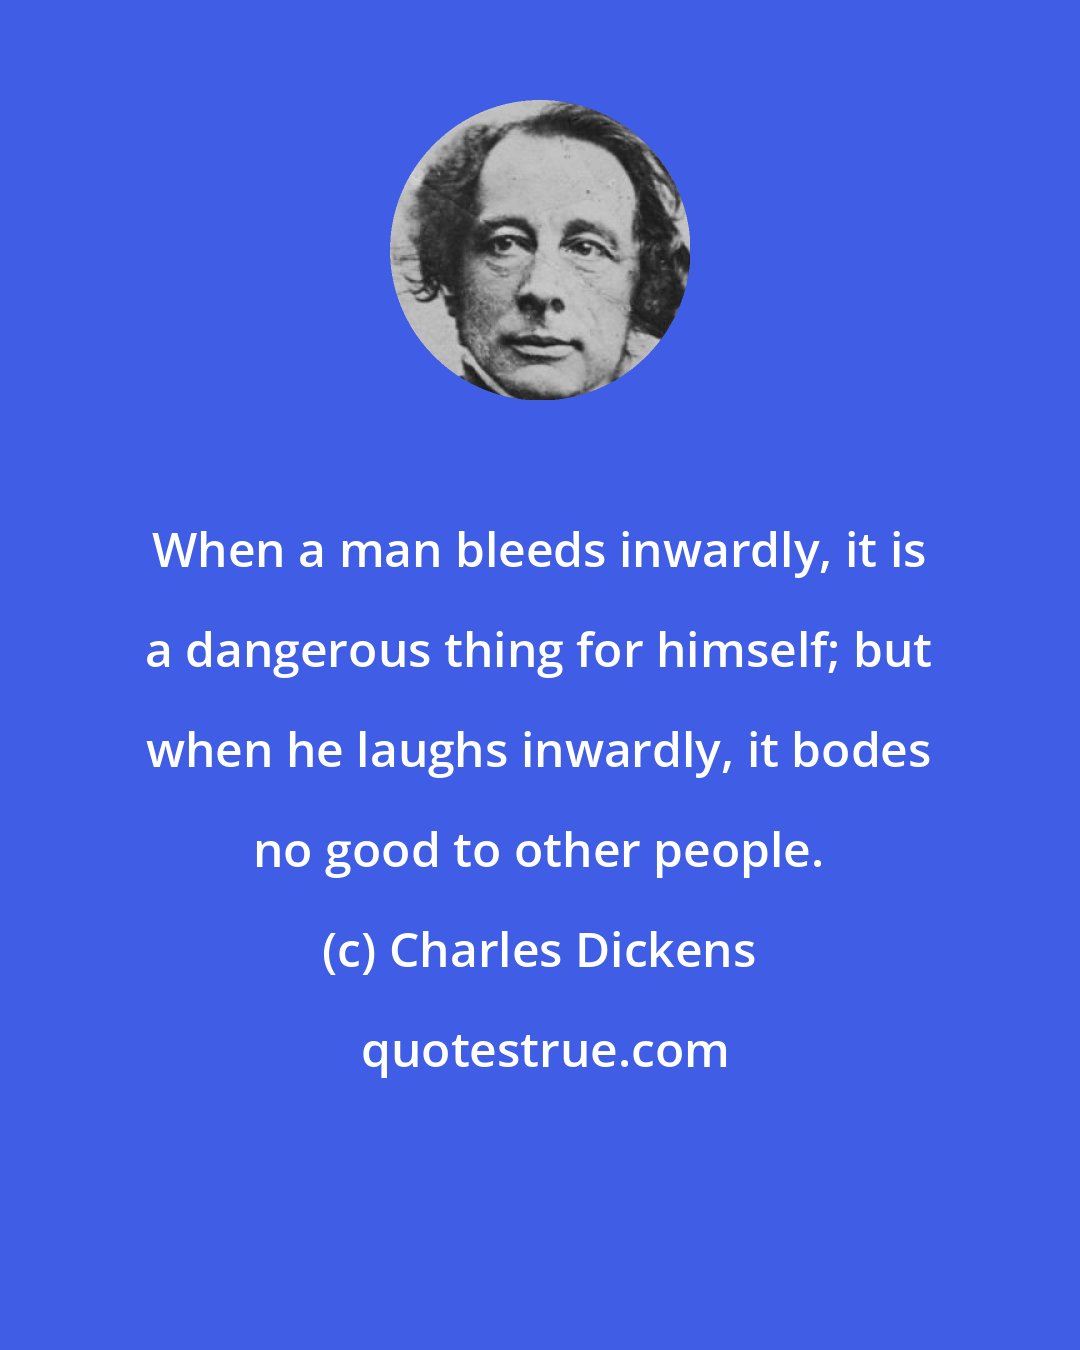 Charles Dickens: When a man bleeds inwardly, it is a dangerous thing for himself; but when he laughs inwardly, it bodes no good to other people.